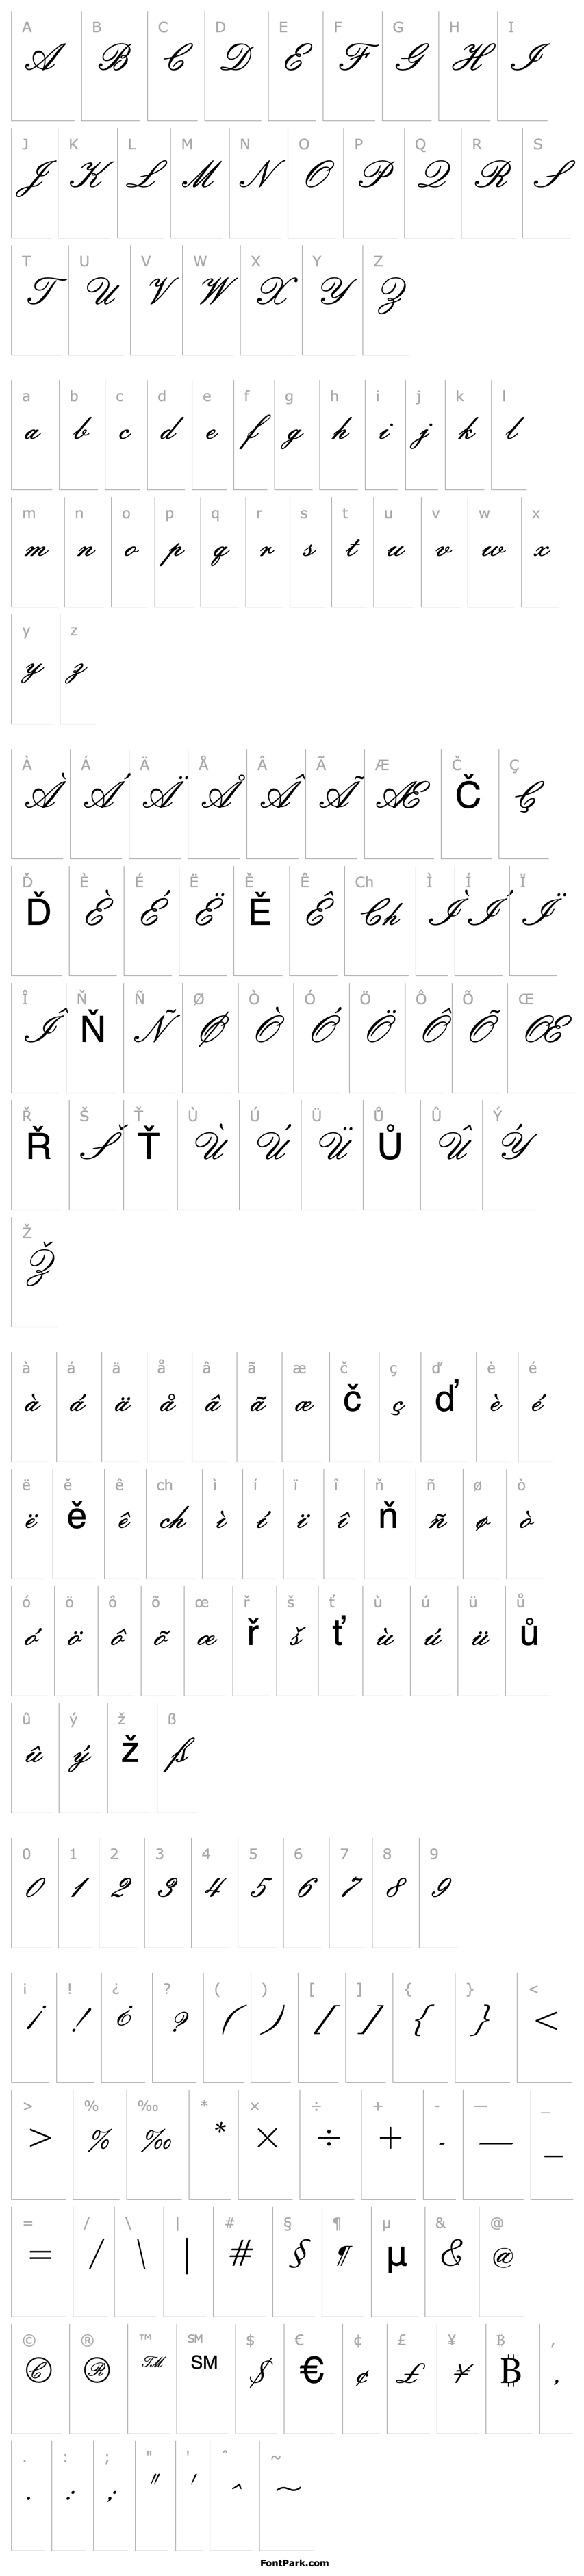 Přehled Empire Script